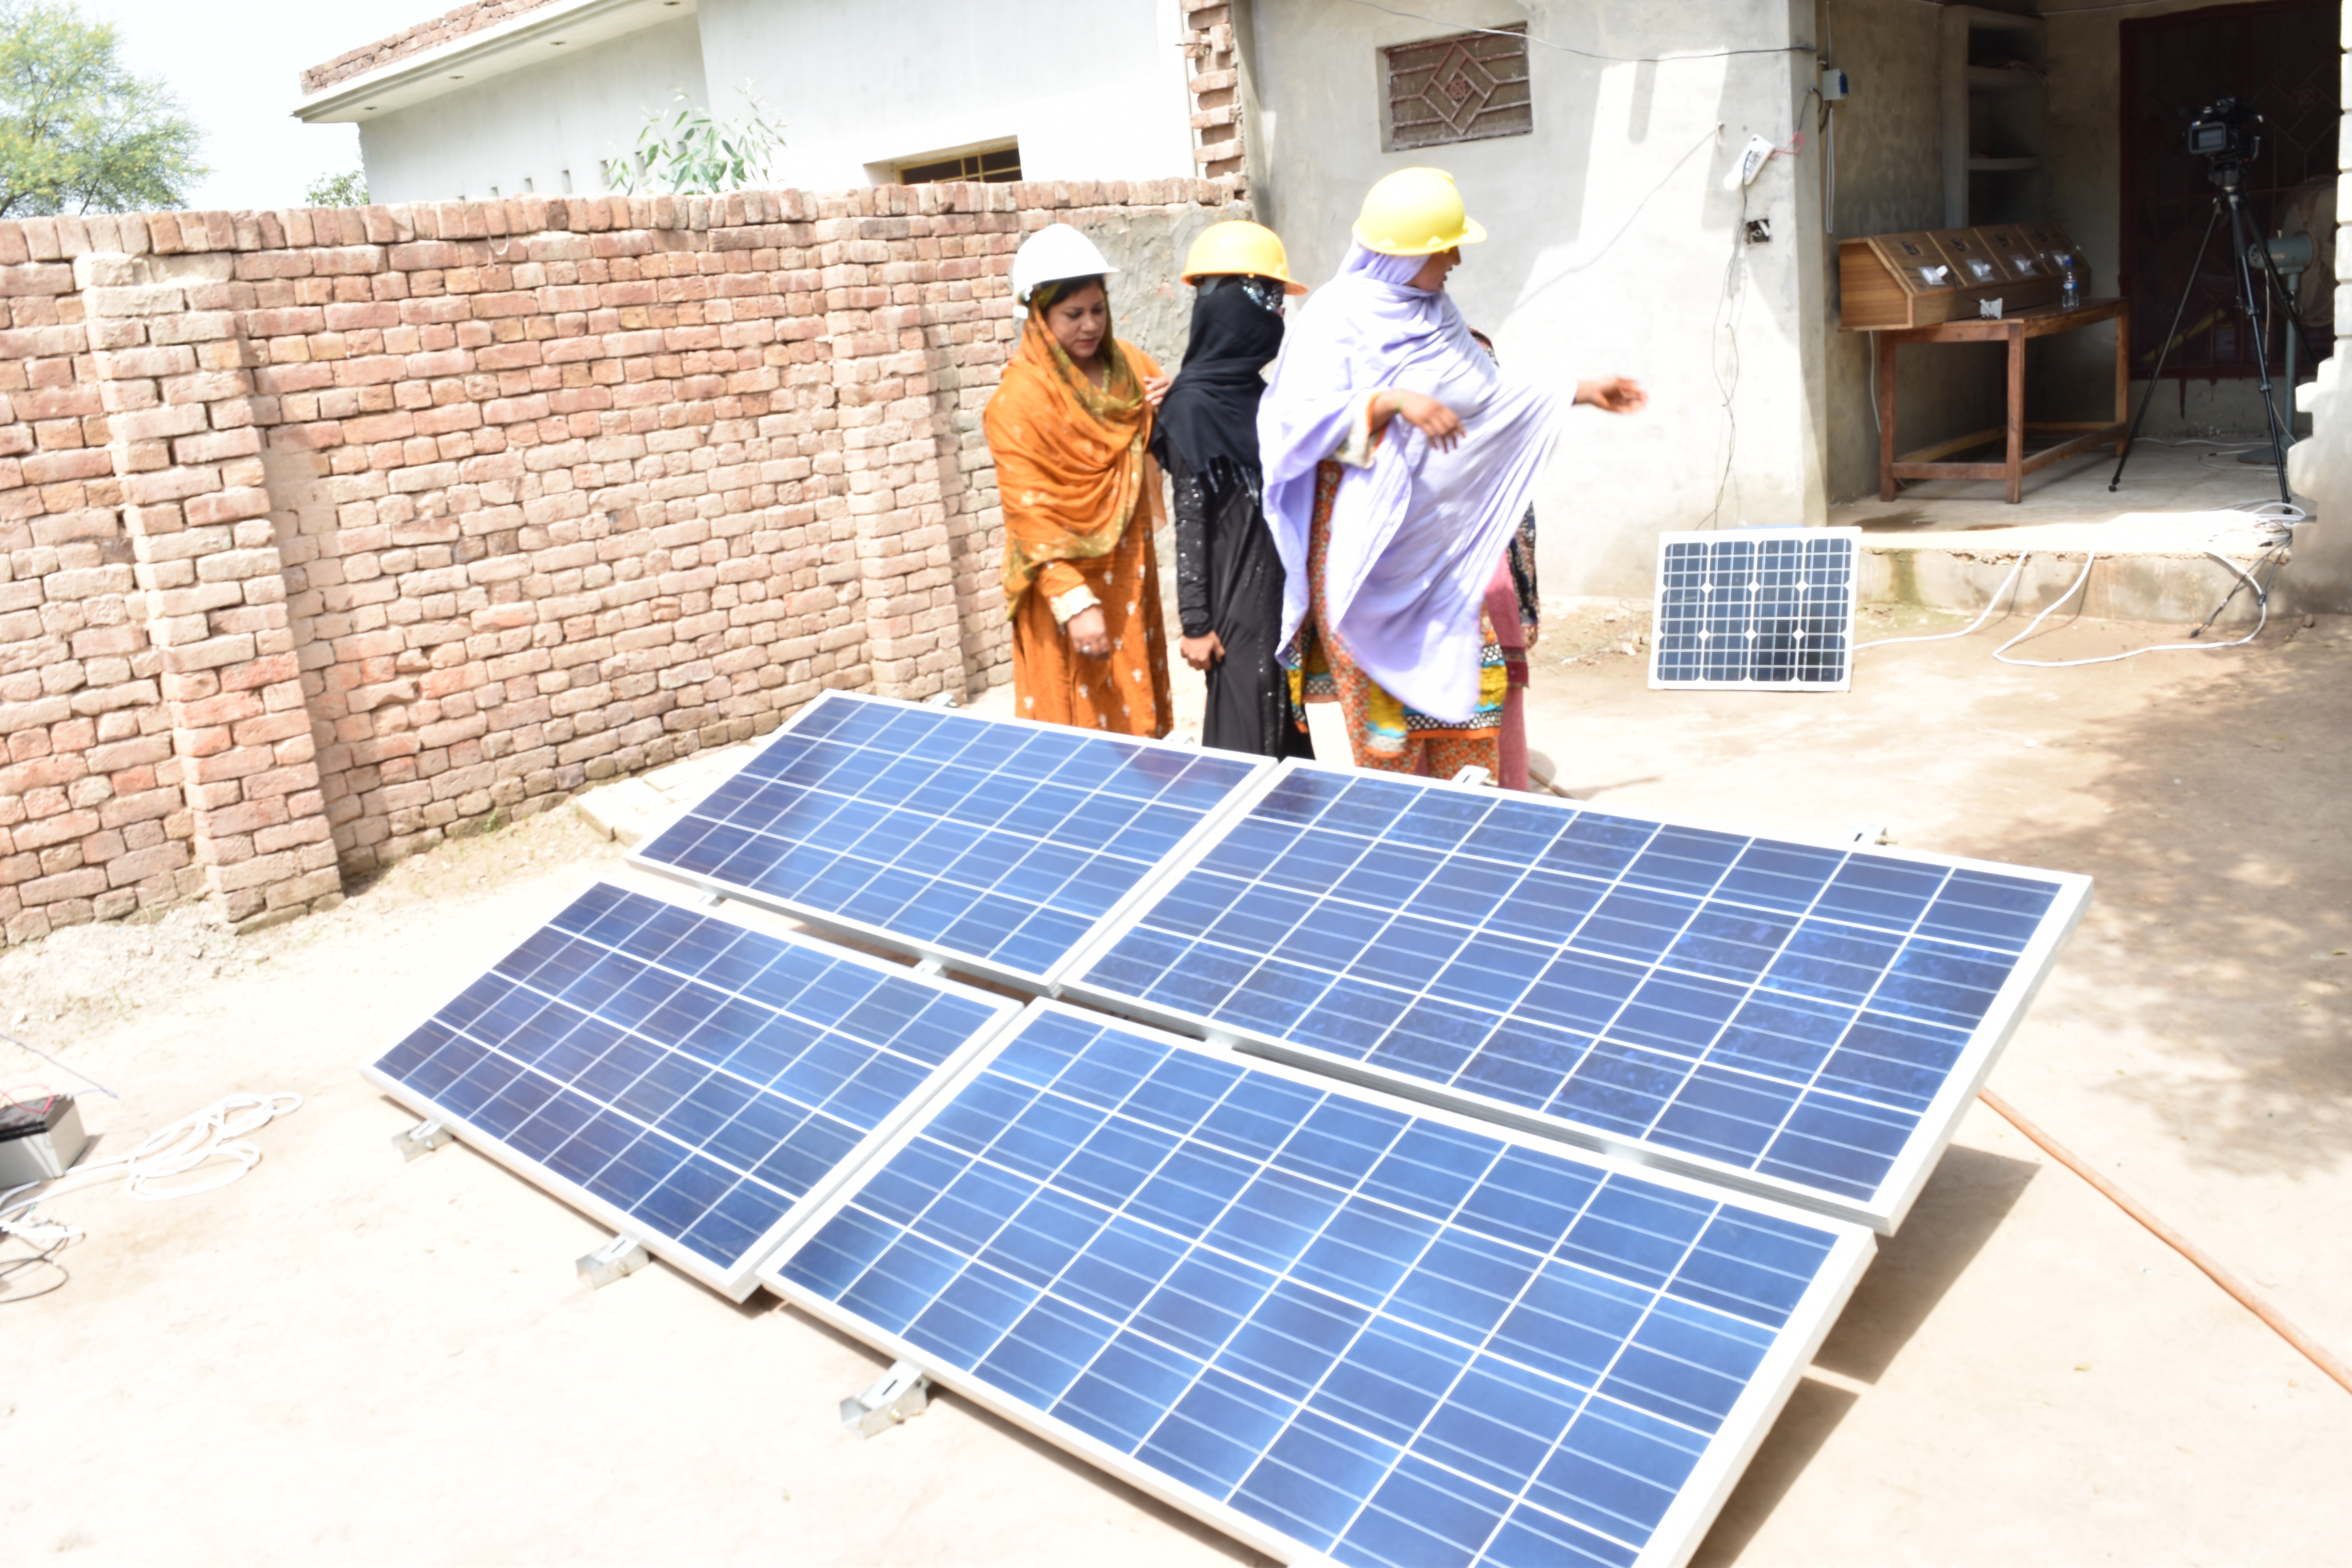 Pakistani women at the forefront of solar energy promotion - ACTED